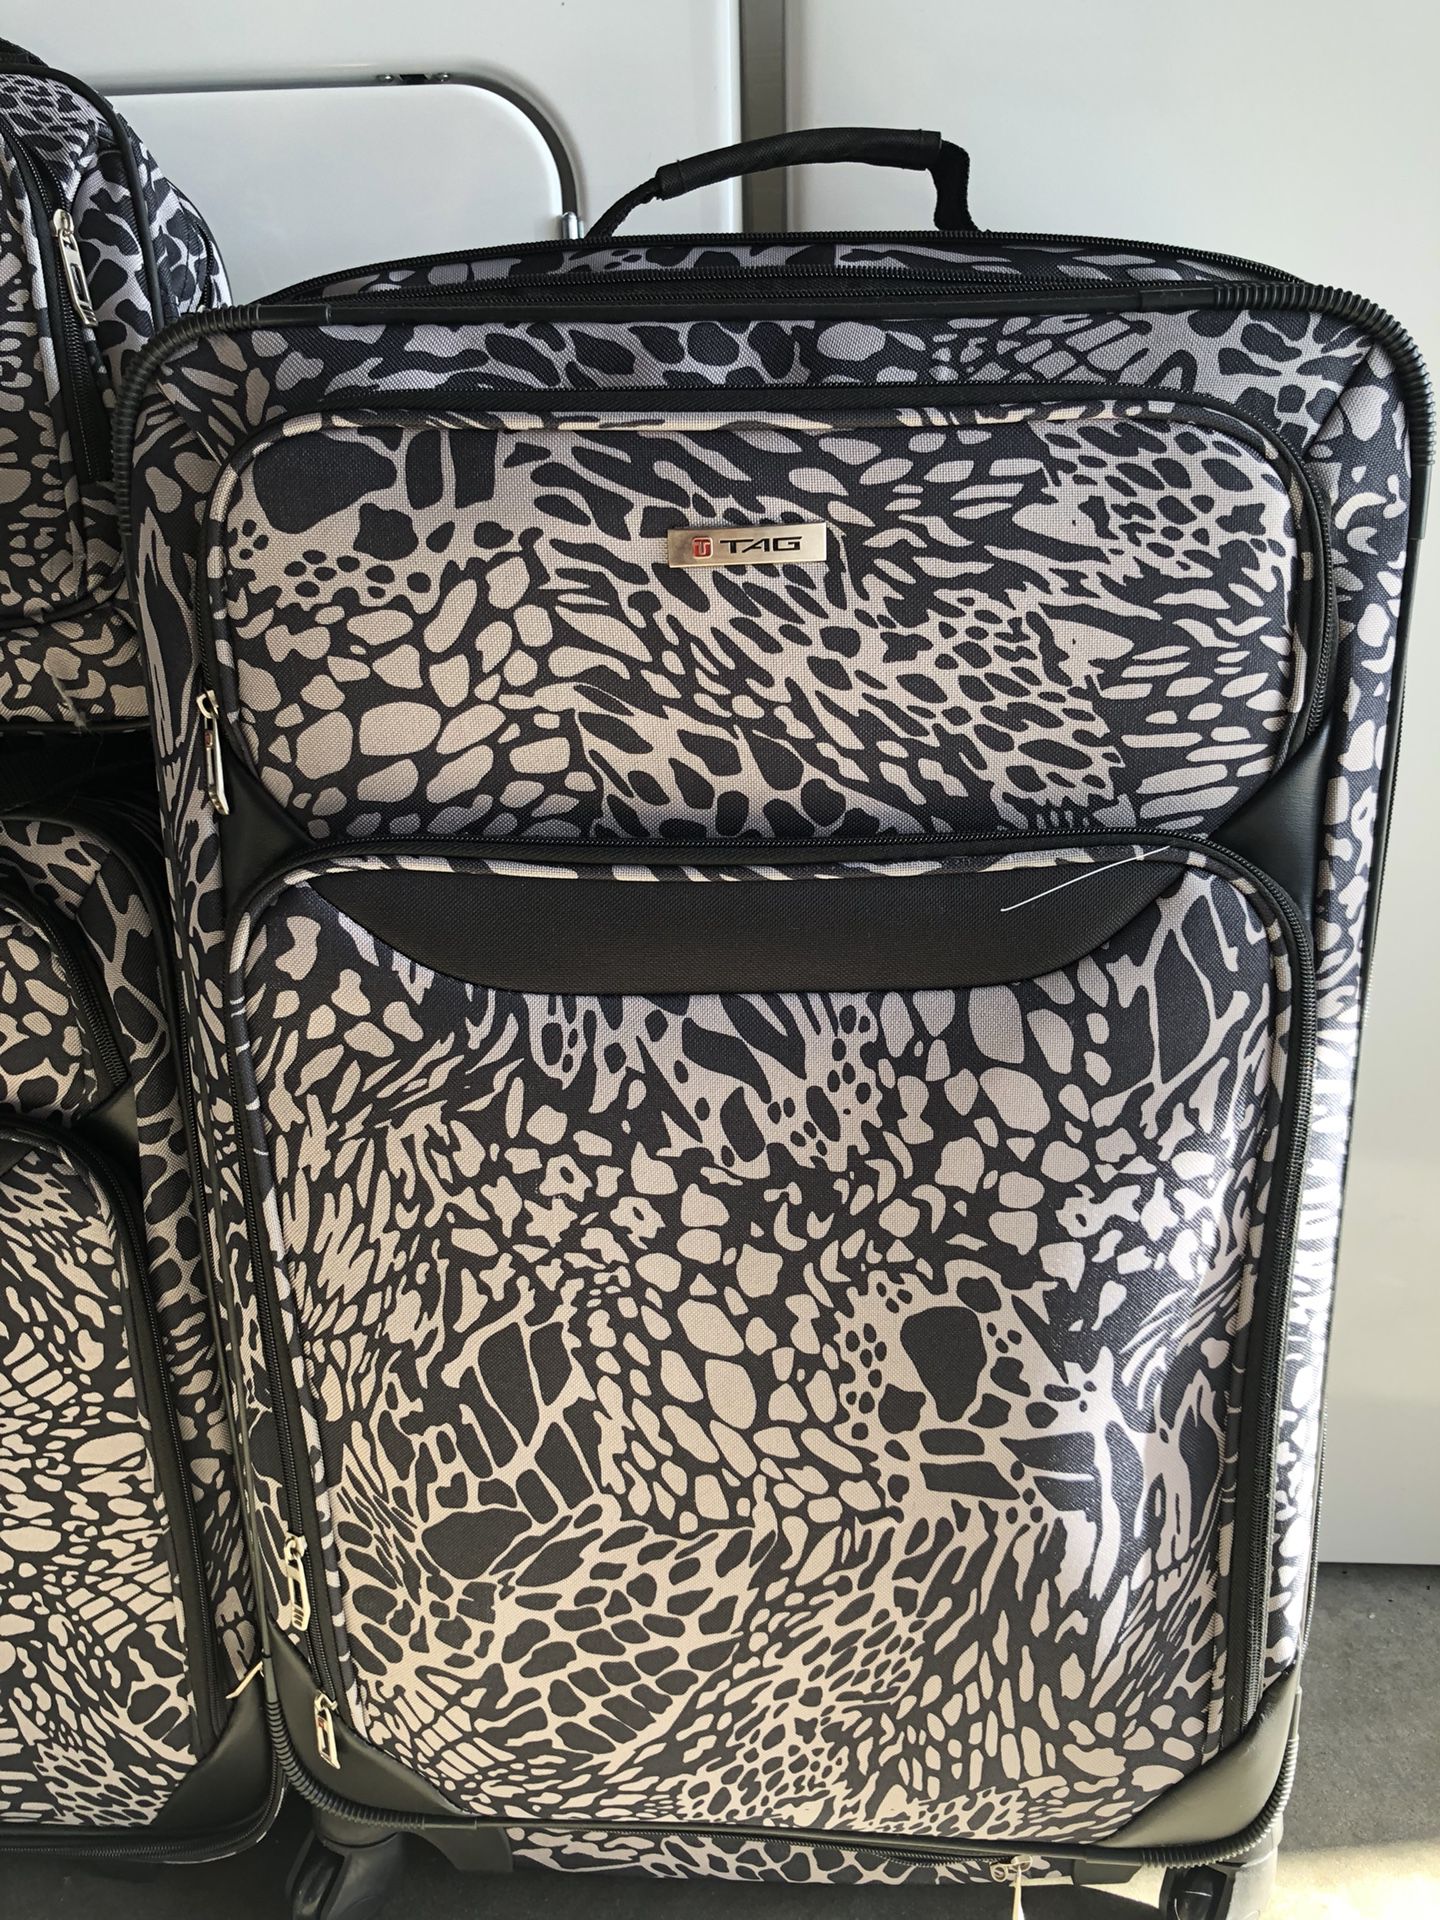 TUMI Tegra-Lite Max Packing Case and Carry-On (luggage) for Sale in Las  Vegas, NV - OfferUp